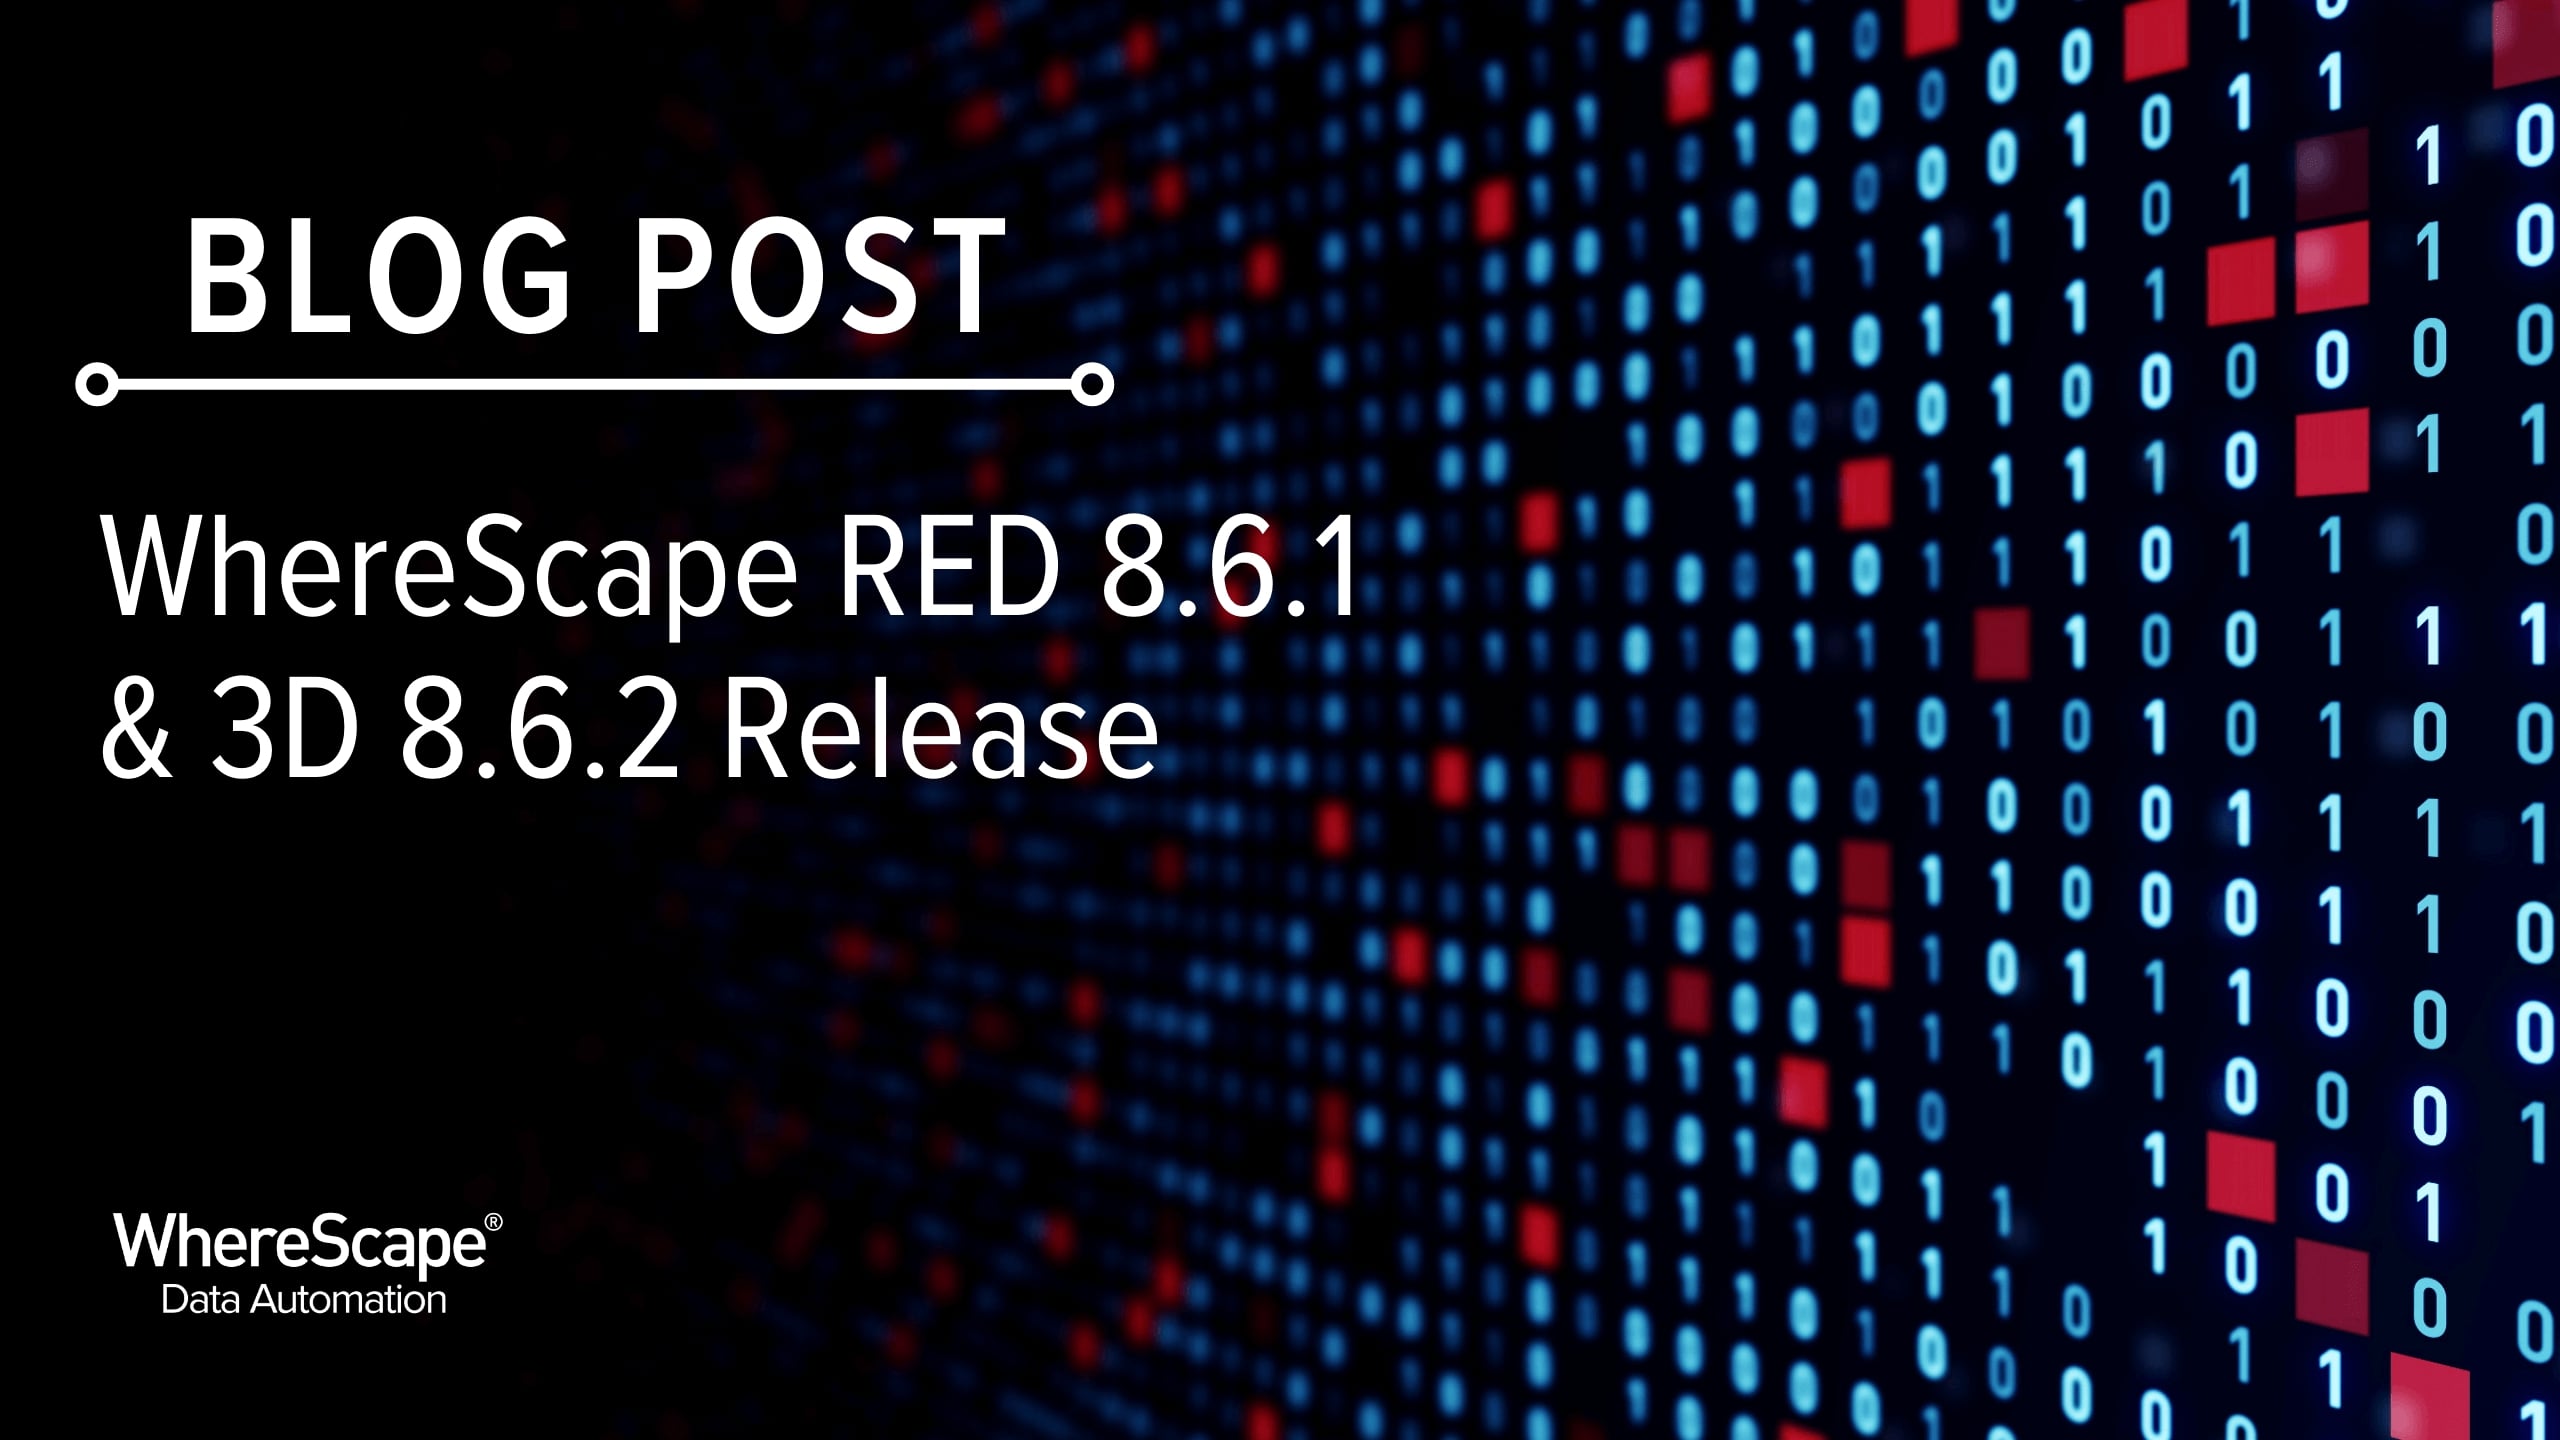 WhereScape RED 8.6.1 & 3D 8.6.2 are Available